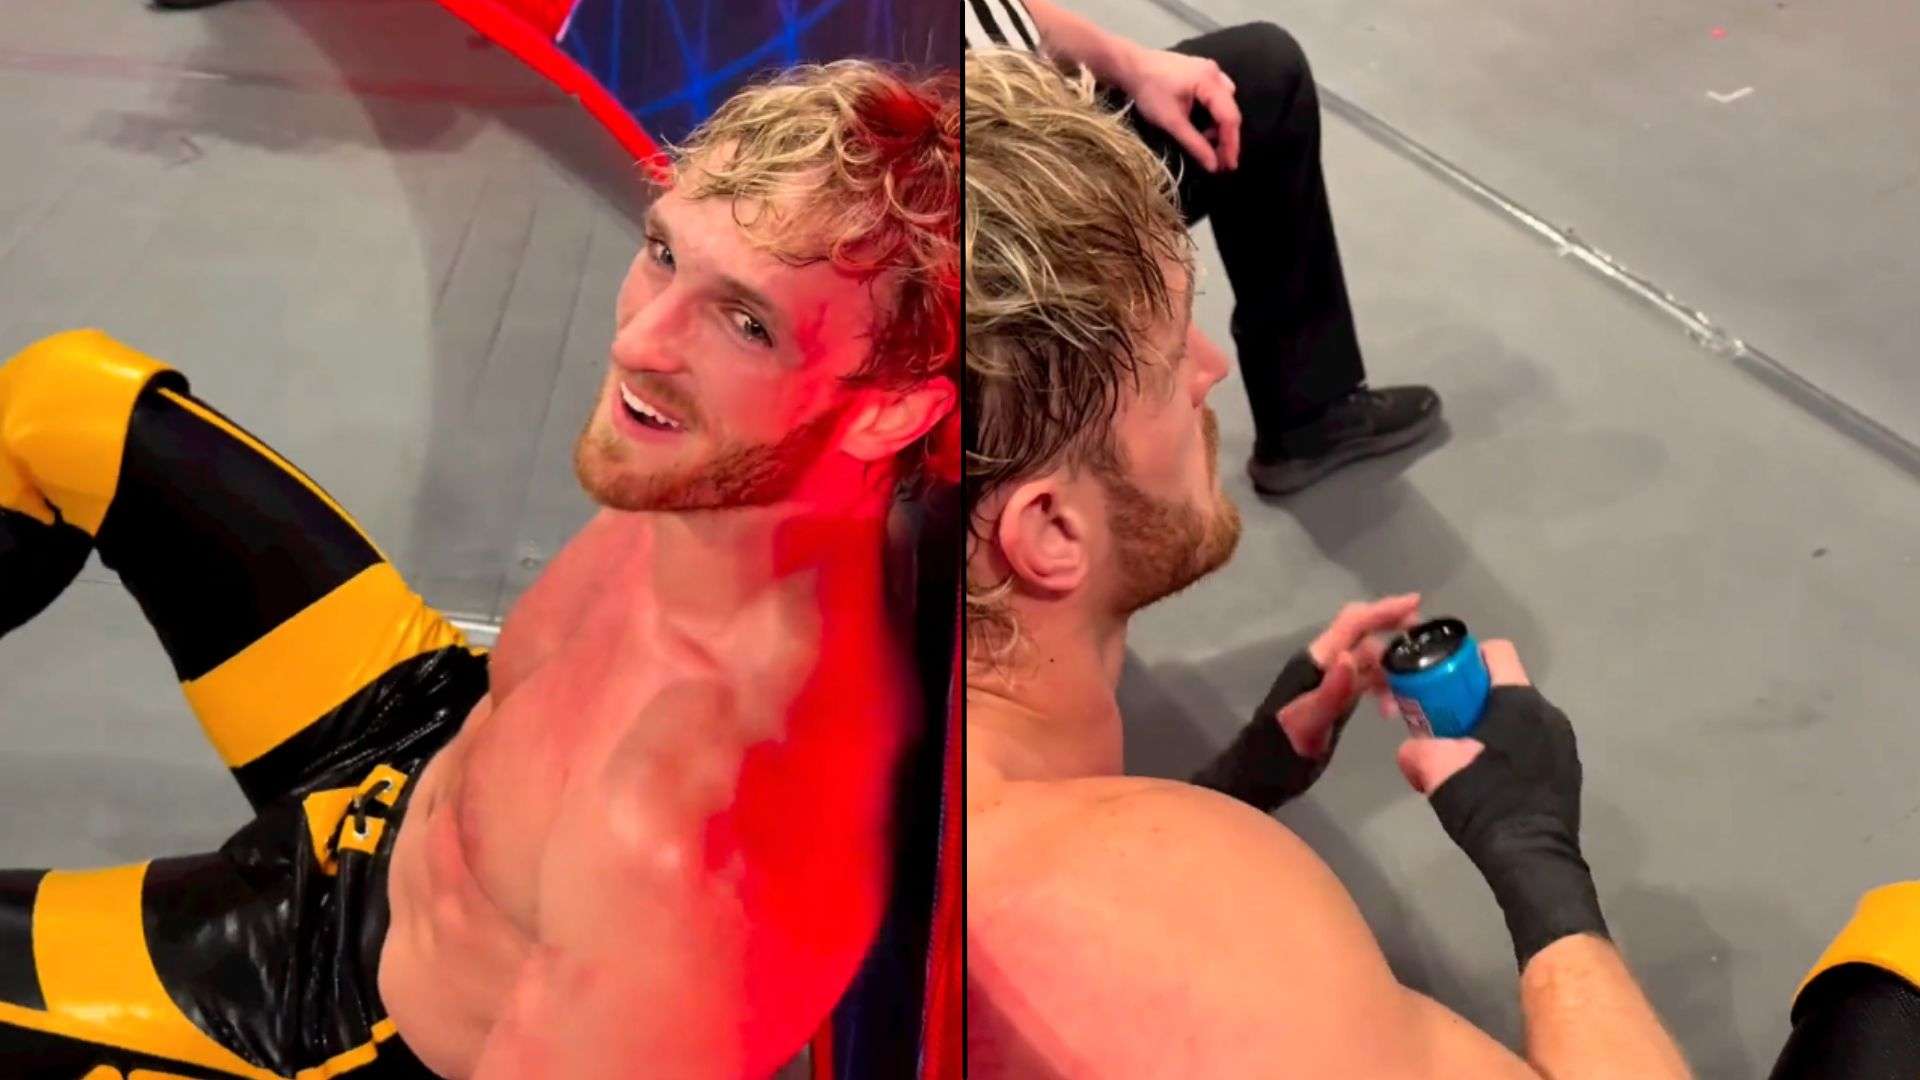 Logan Paul sat outside WWE ring in yellow and black outfit drinking blue prime